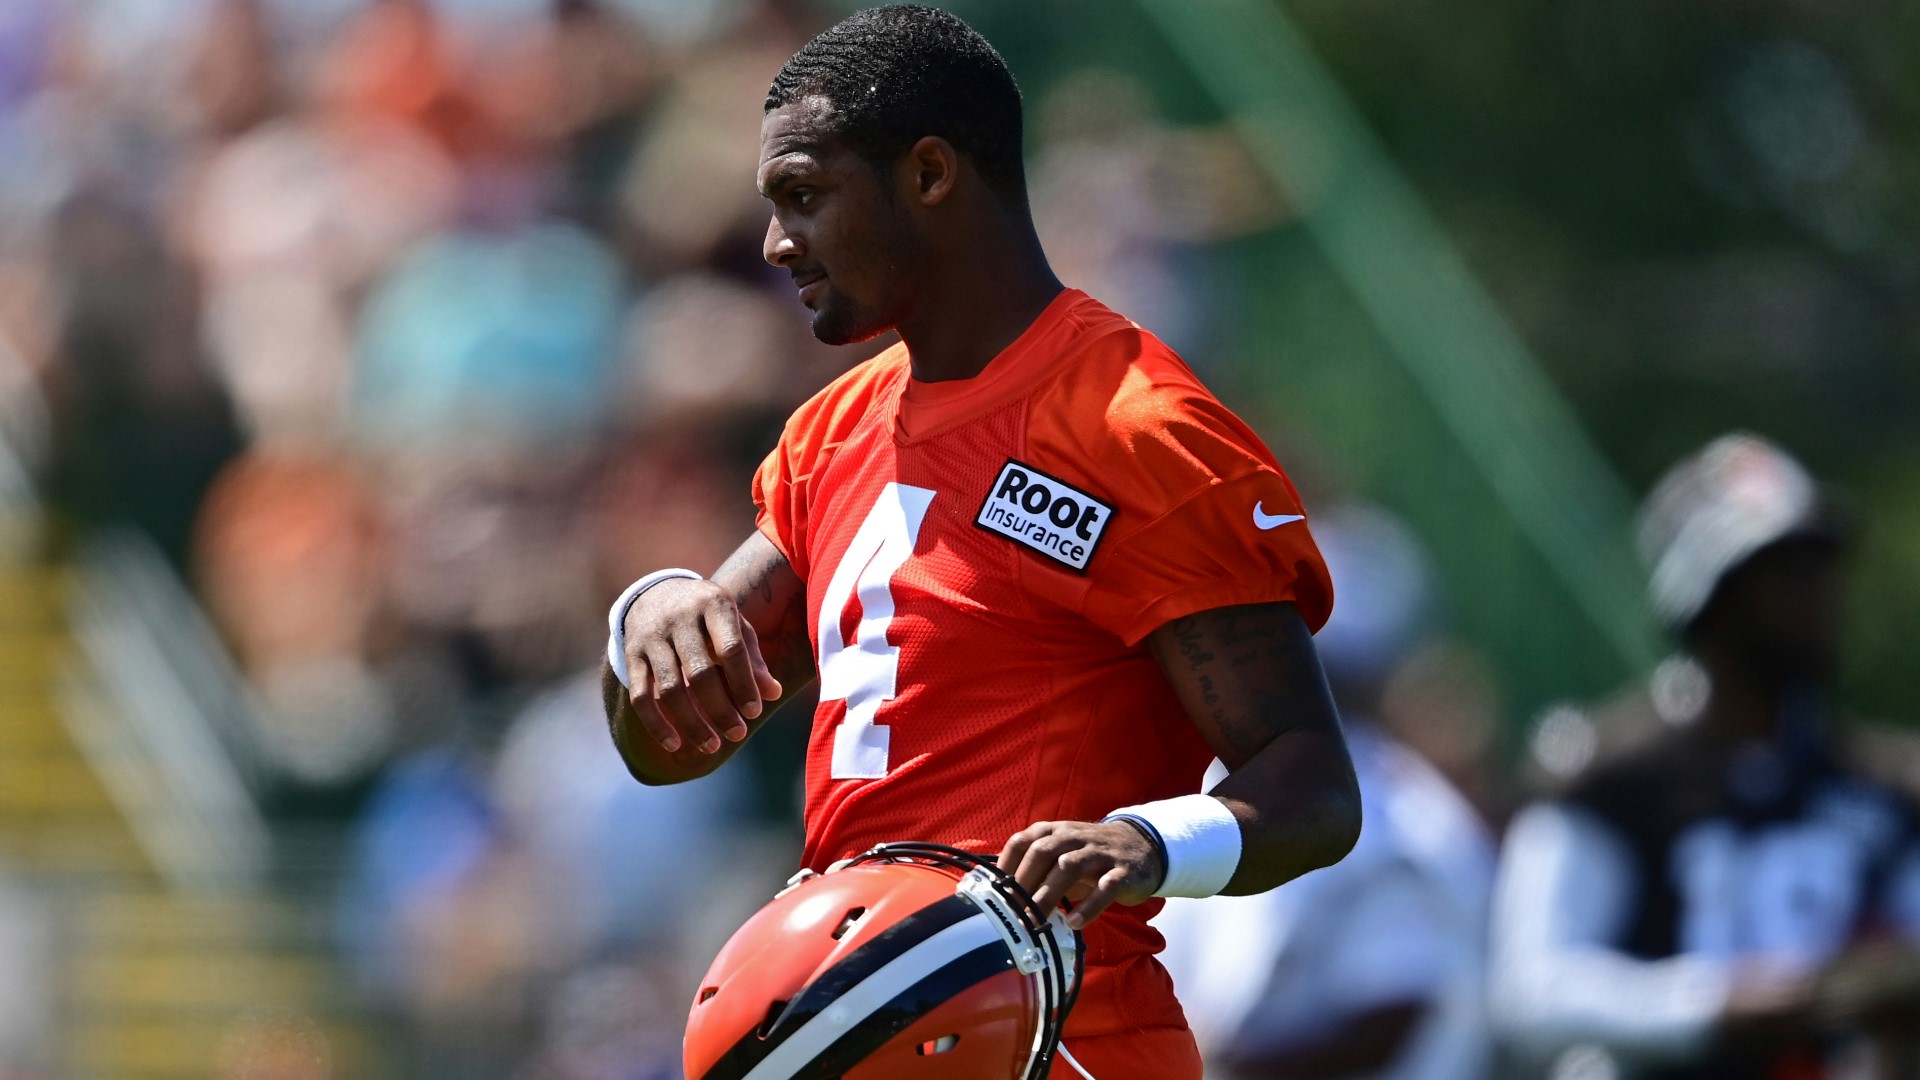 Watson is eligible to return on Oct. 23 when the Cleveland Browns take on the Baltimore Ravens.